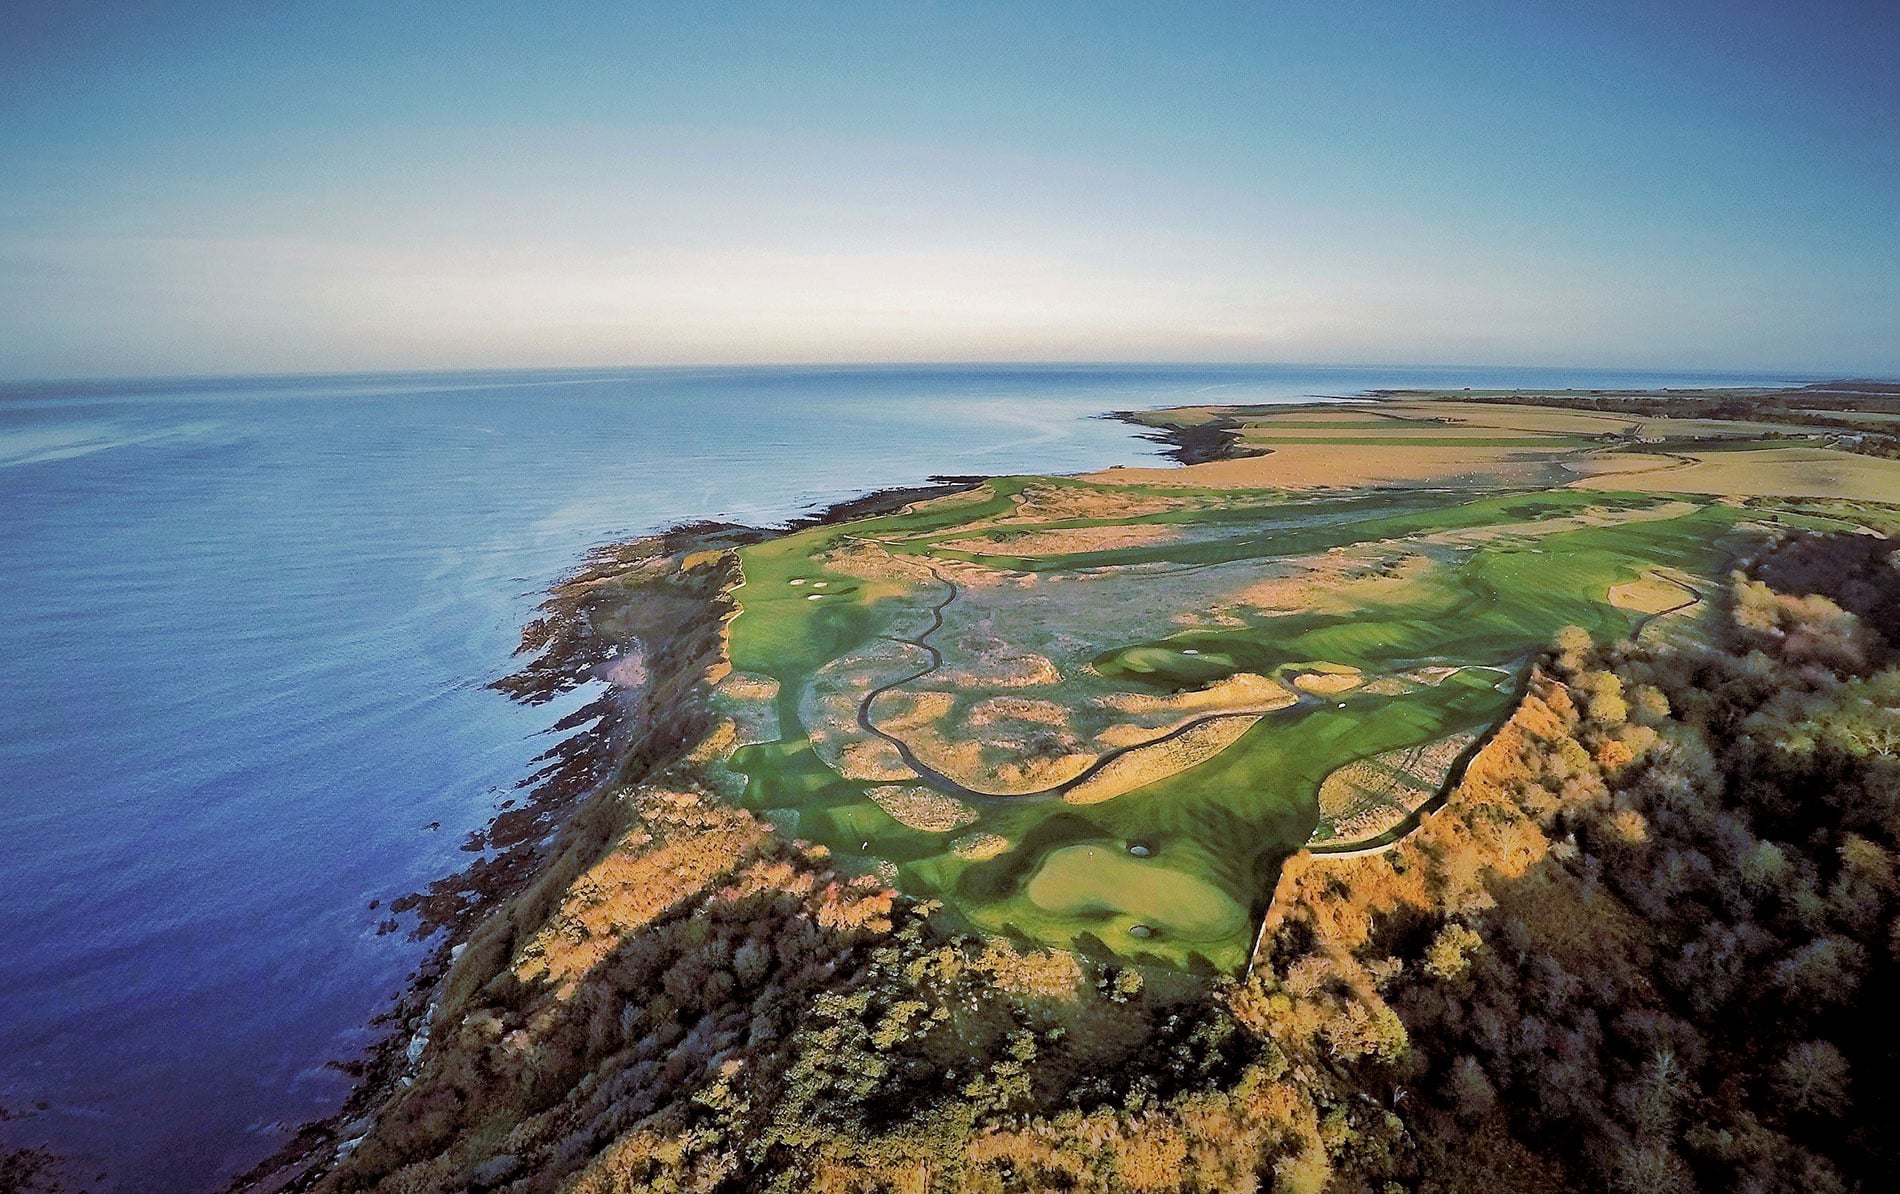 Aerial view of the Torrance and Kittocks Golf Courses at The Fairmont Hotel, St Andrews